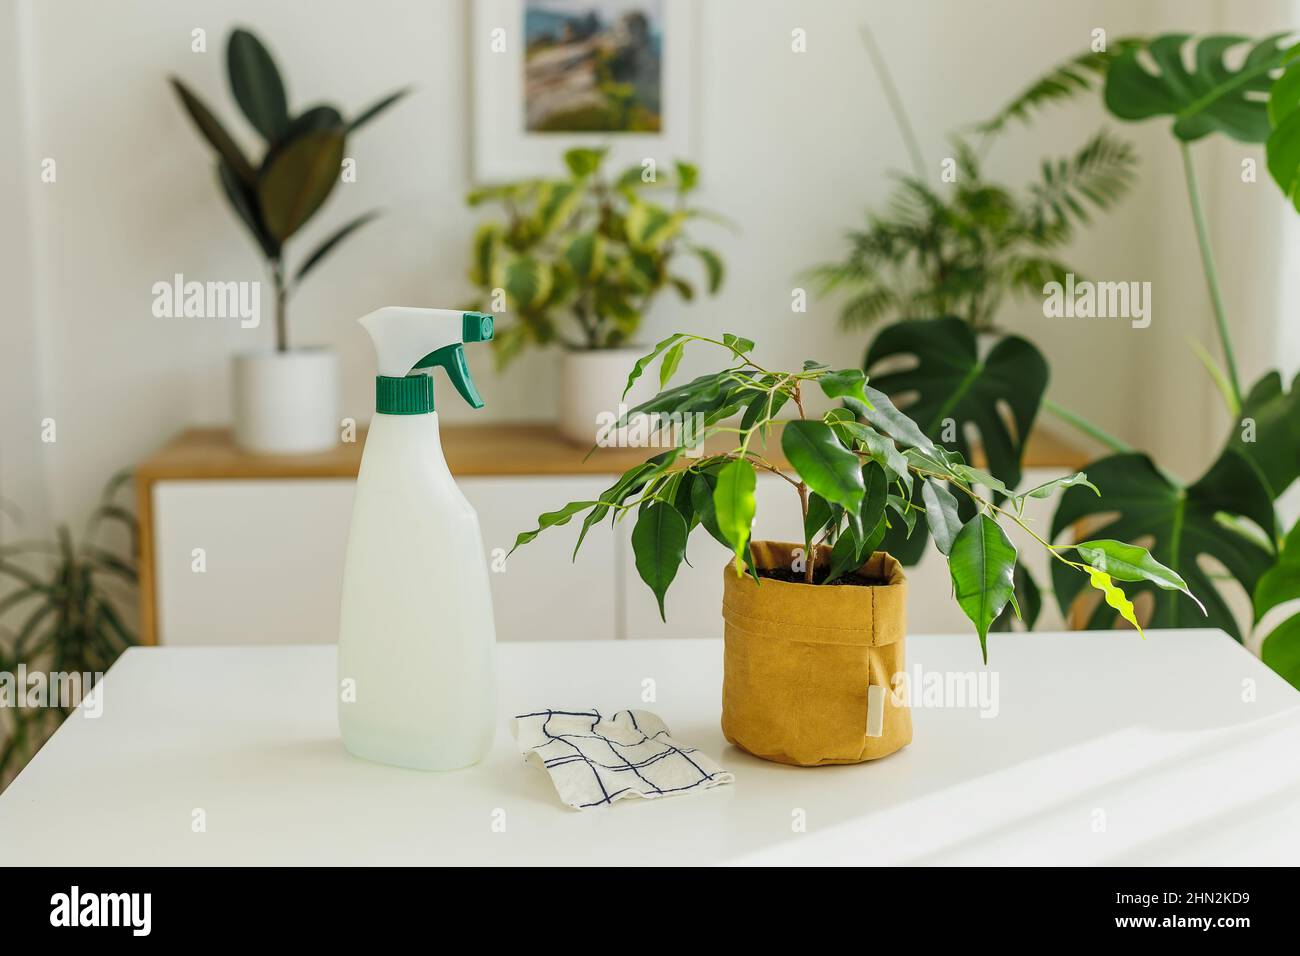 Spraying bottle and rag near ficus. Concept of home gardening and houseplants care at springtime. Home plants cleaning tools. Stock Photo